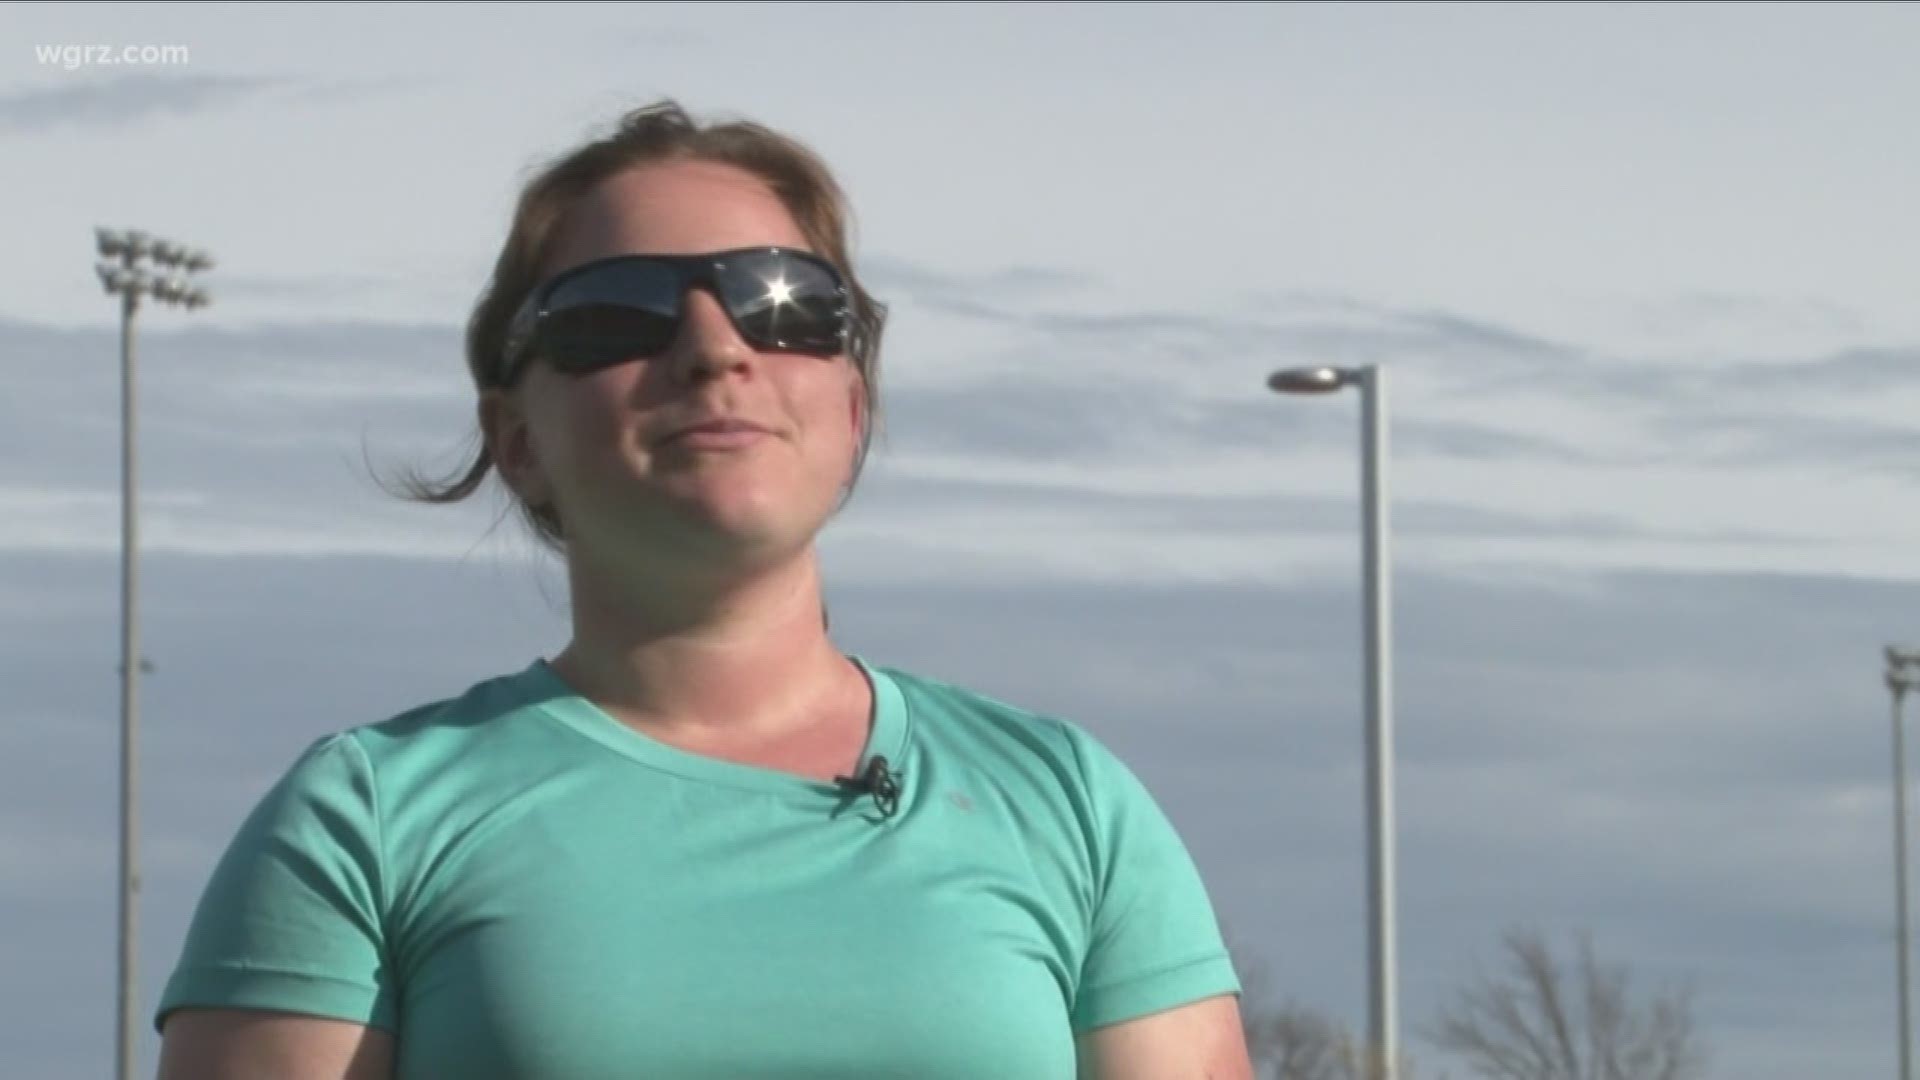 Lindsay Ball is a former Paralympic skier and avid runner. Many runners overcome, cramping, fatigue or injury on long runs but Lindsay is visually impaired, she is not able to see.